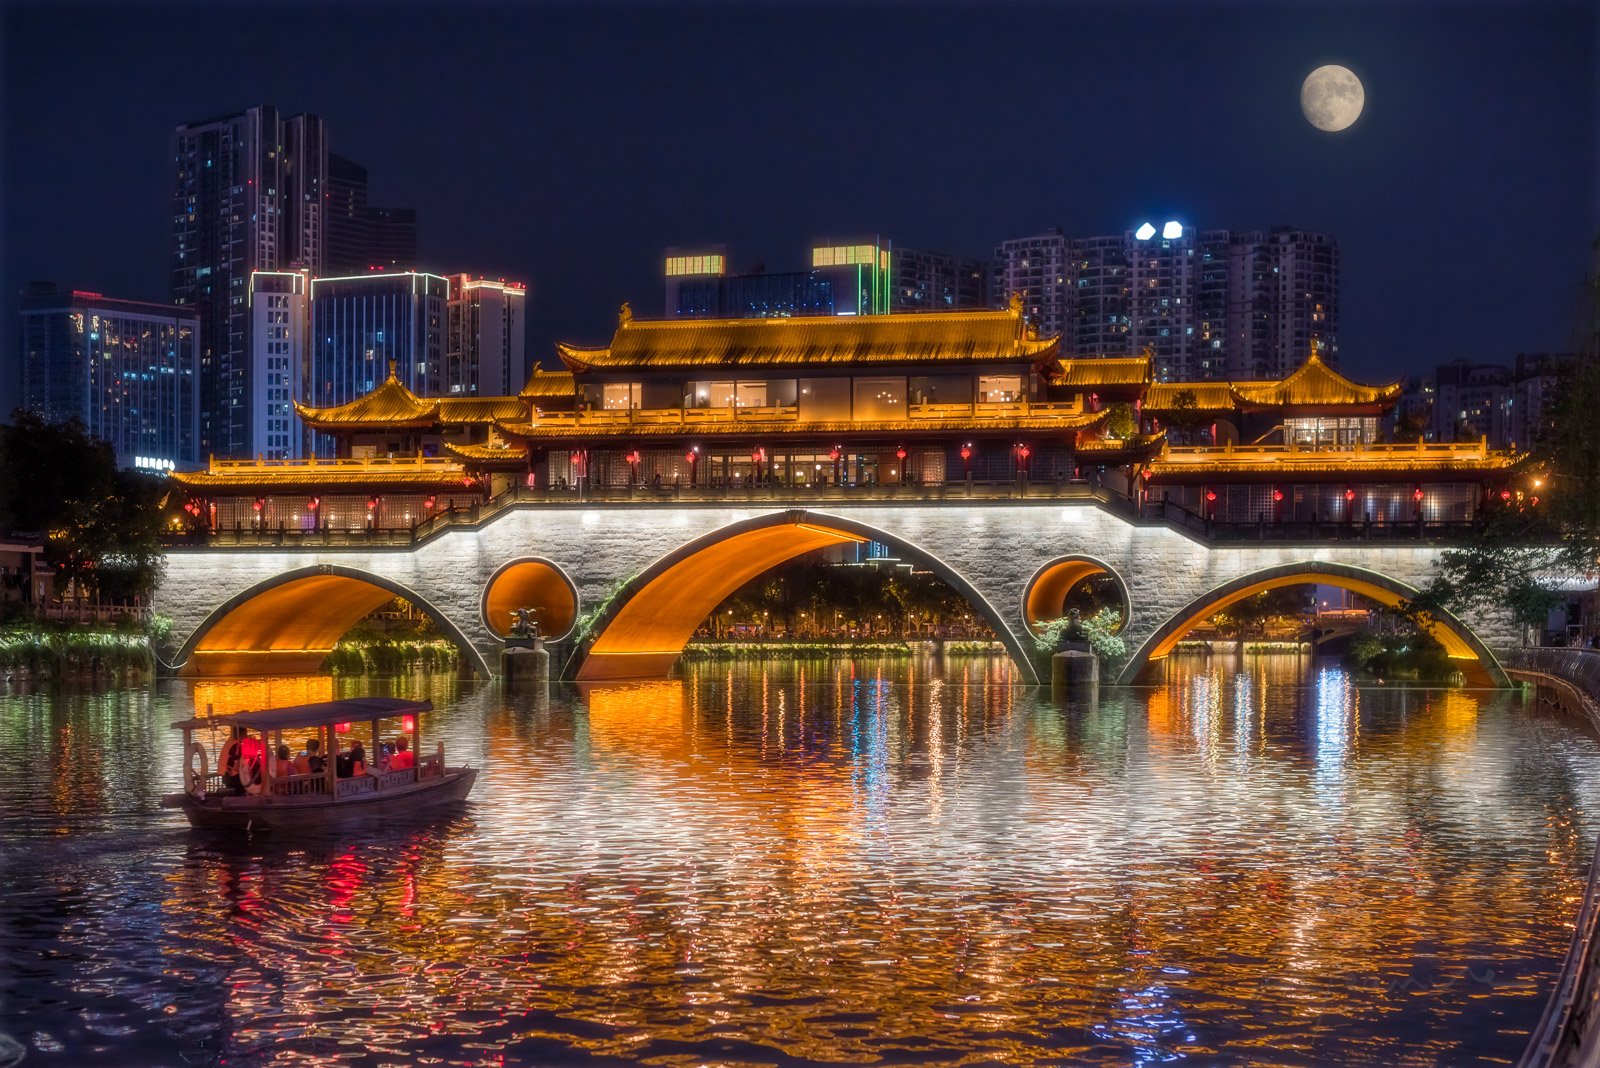 Anshun bridge illuminated at night with full moon. A chinese ancient little boat with red chinese lanterns is sailing on the Jinjiang river for the mid-autumn moon festival